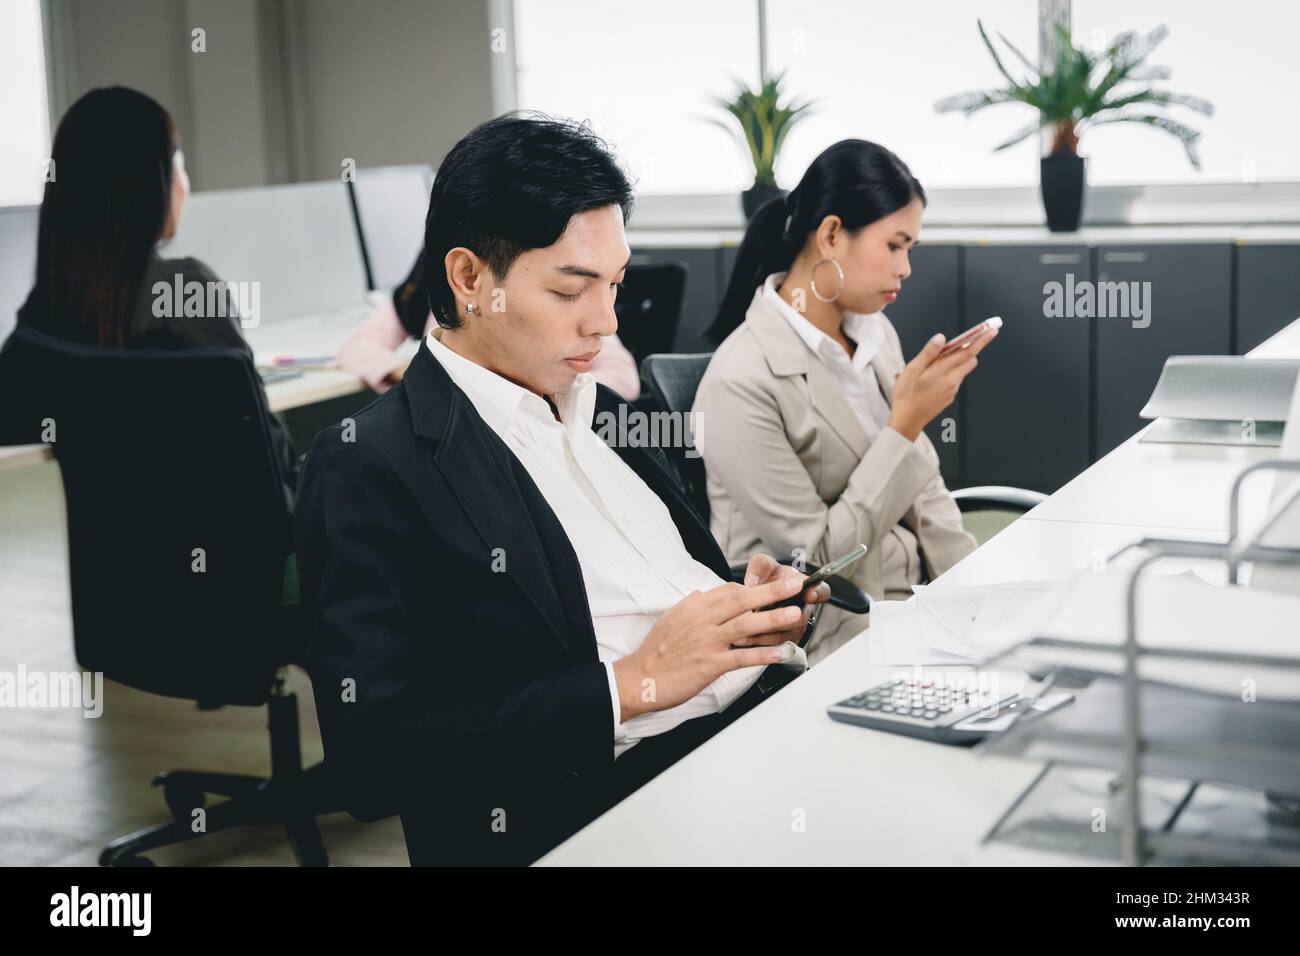 Office employee playing smartphone at work and social media addicted bad habit for business company problem. Stock Photo